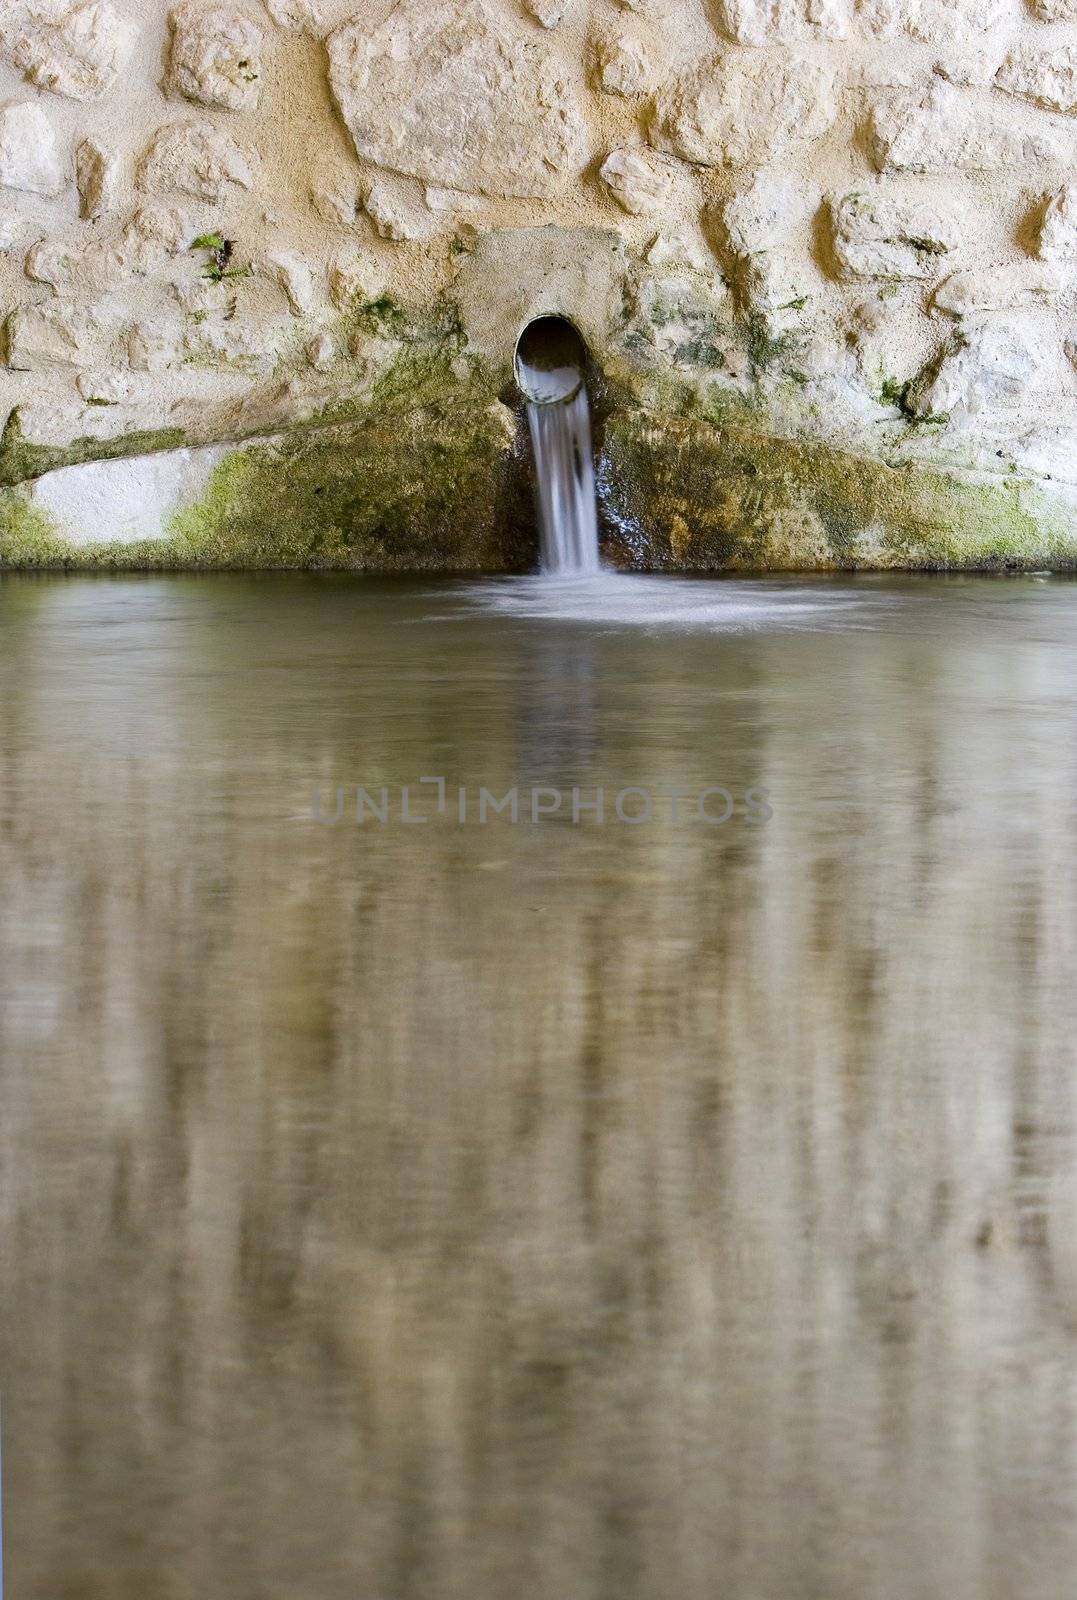 image of a fountain in a village of navarra spain